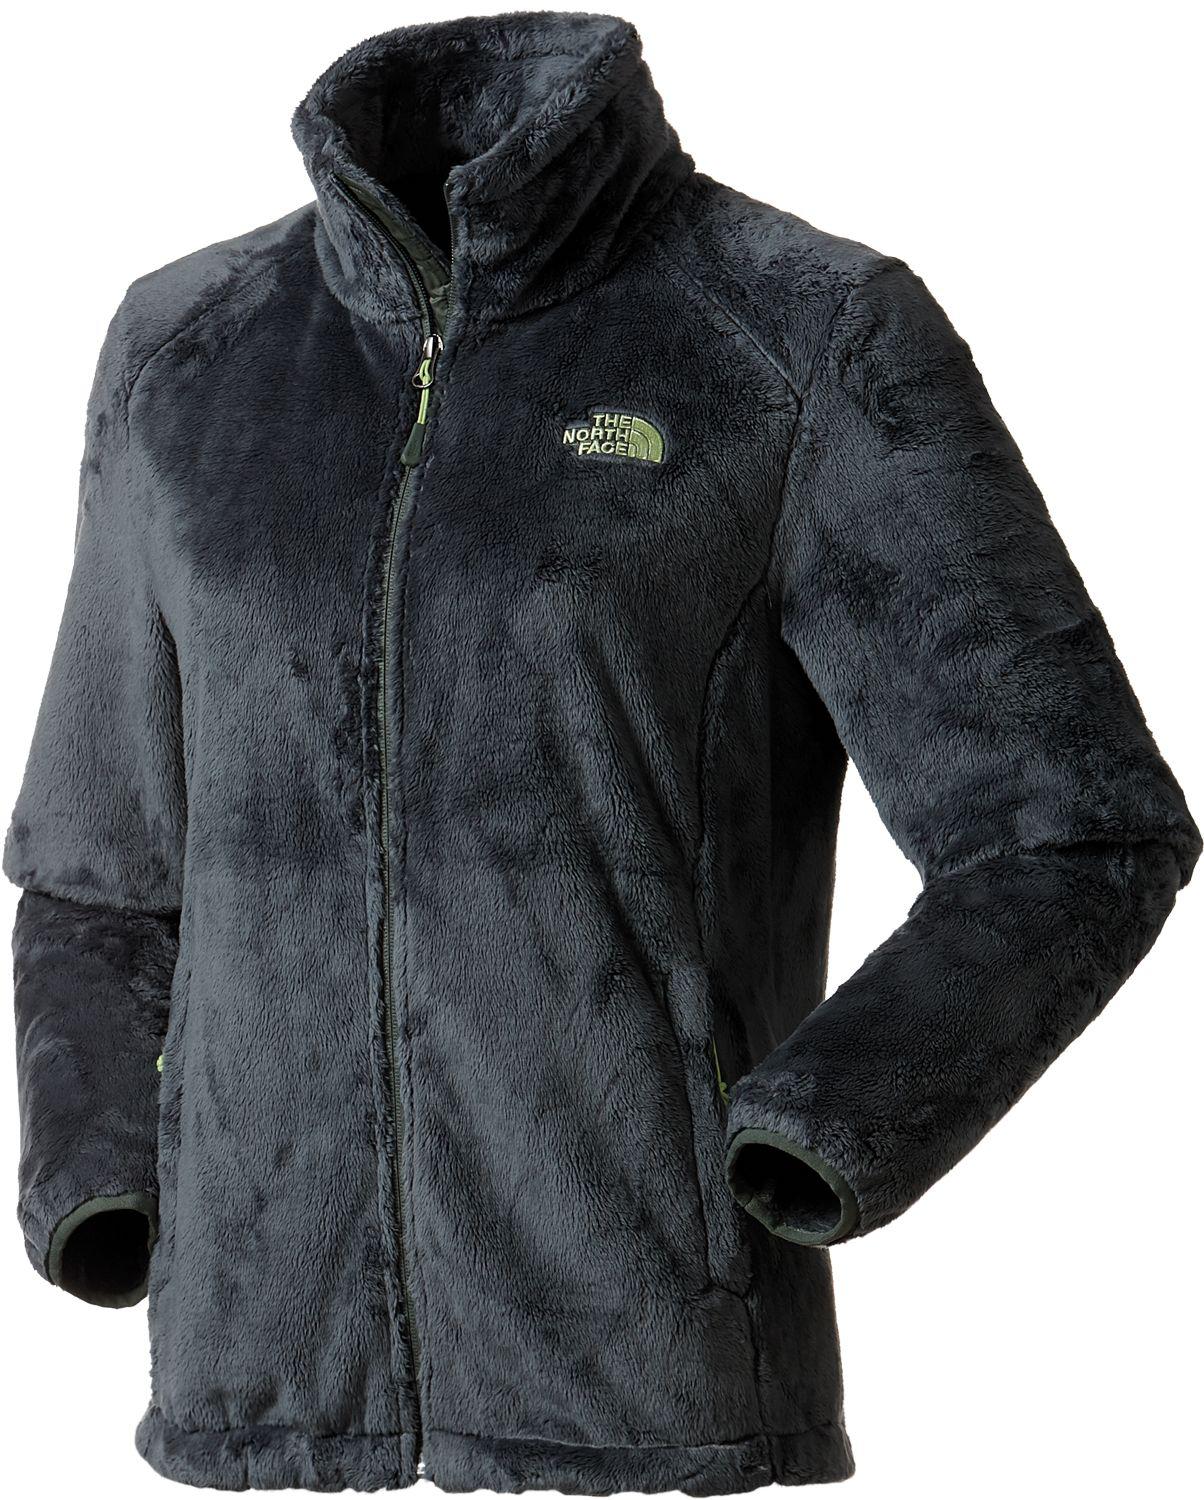 the north face men's osito jacket